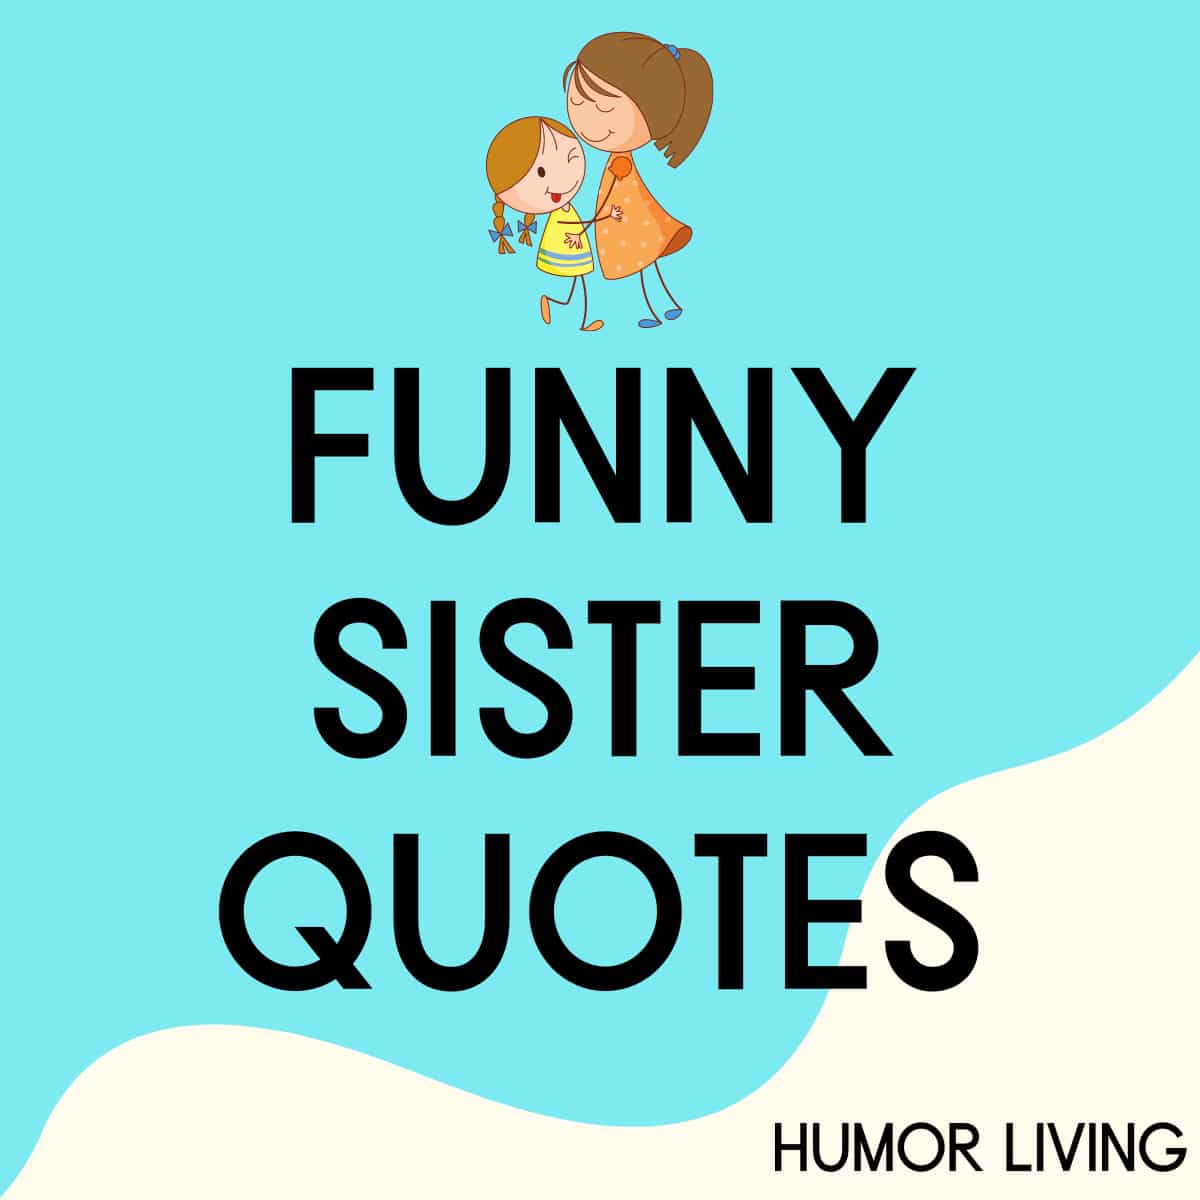 101 Funny Sister Quotes to Make You Smile - Humor Living